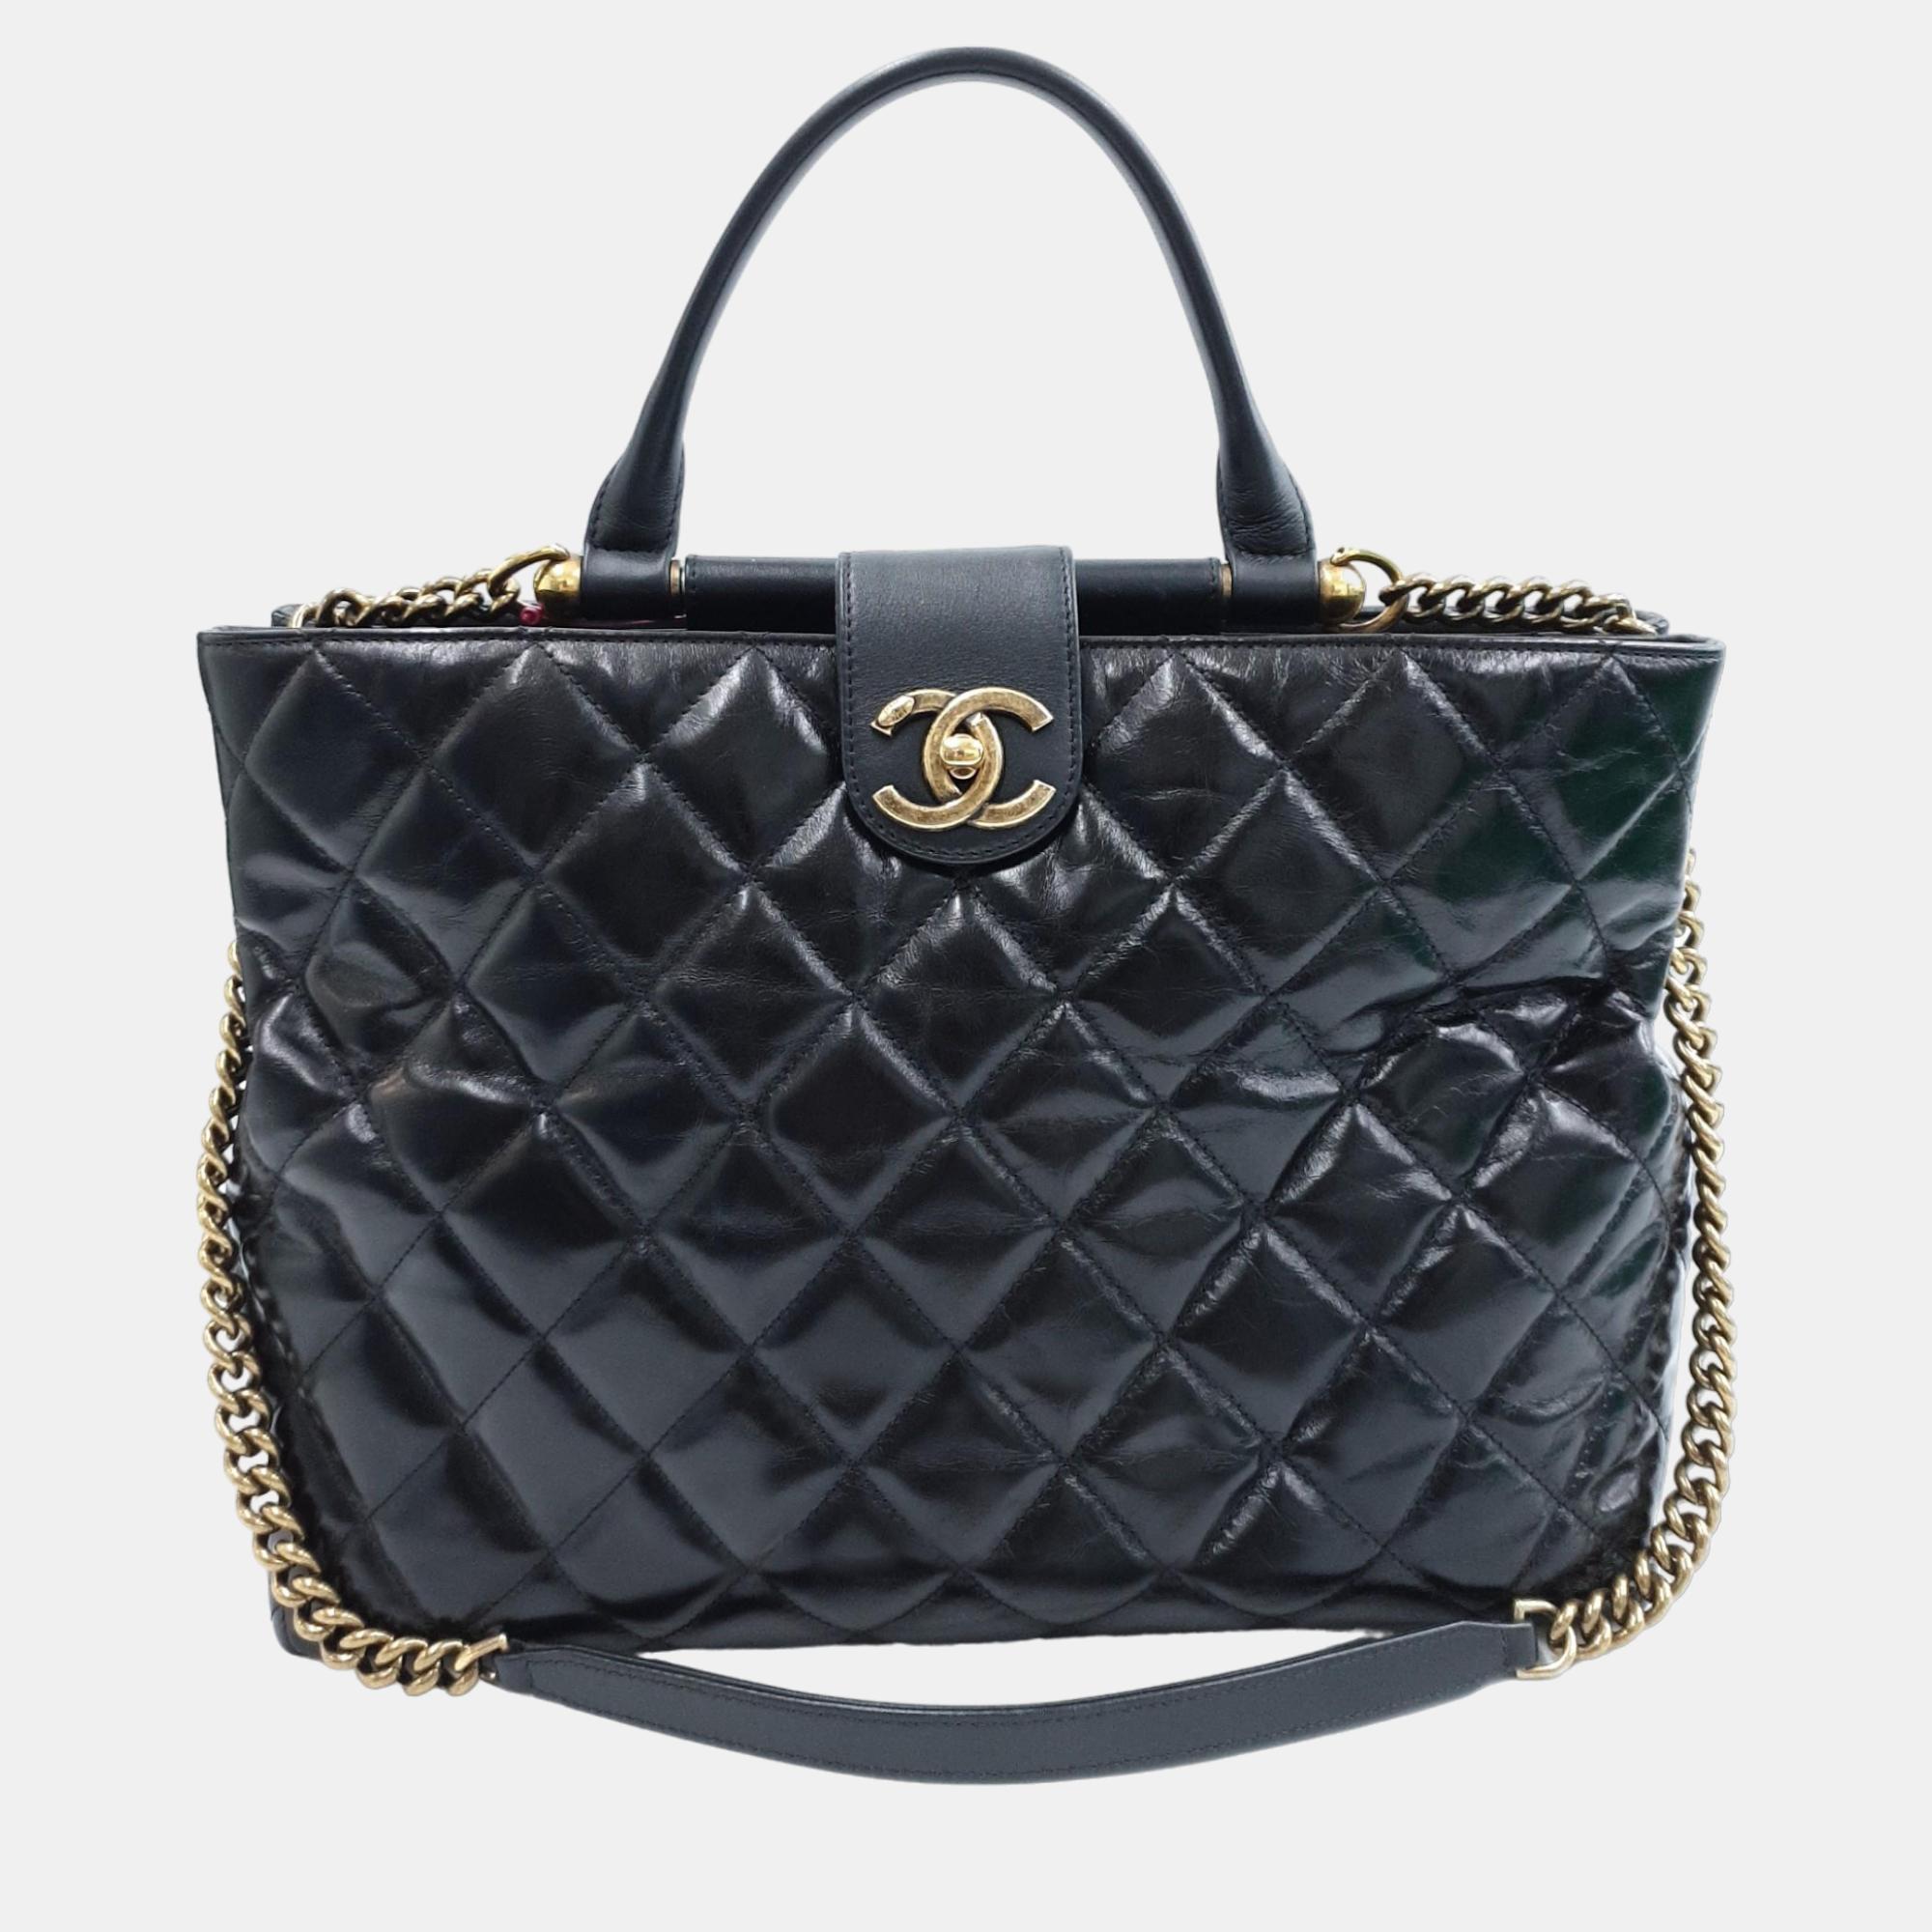 Chanel Black Quilted Leather CC Tote Bag